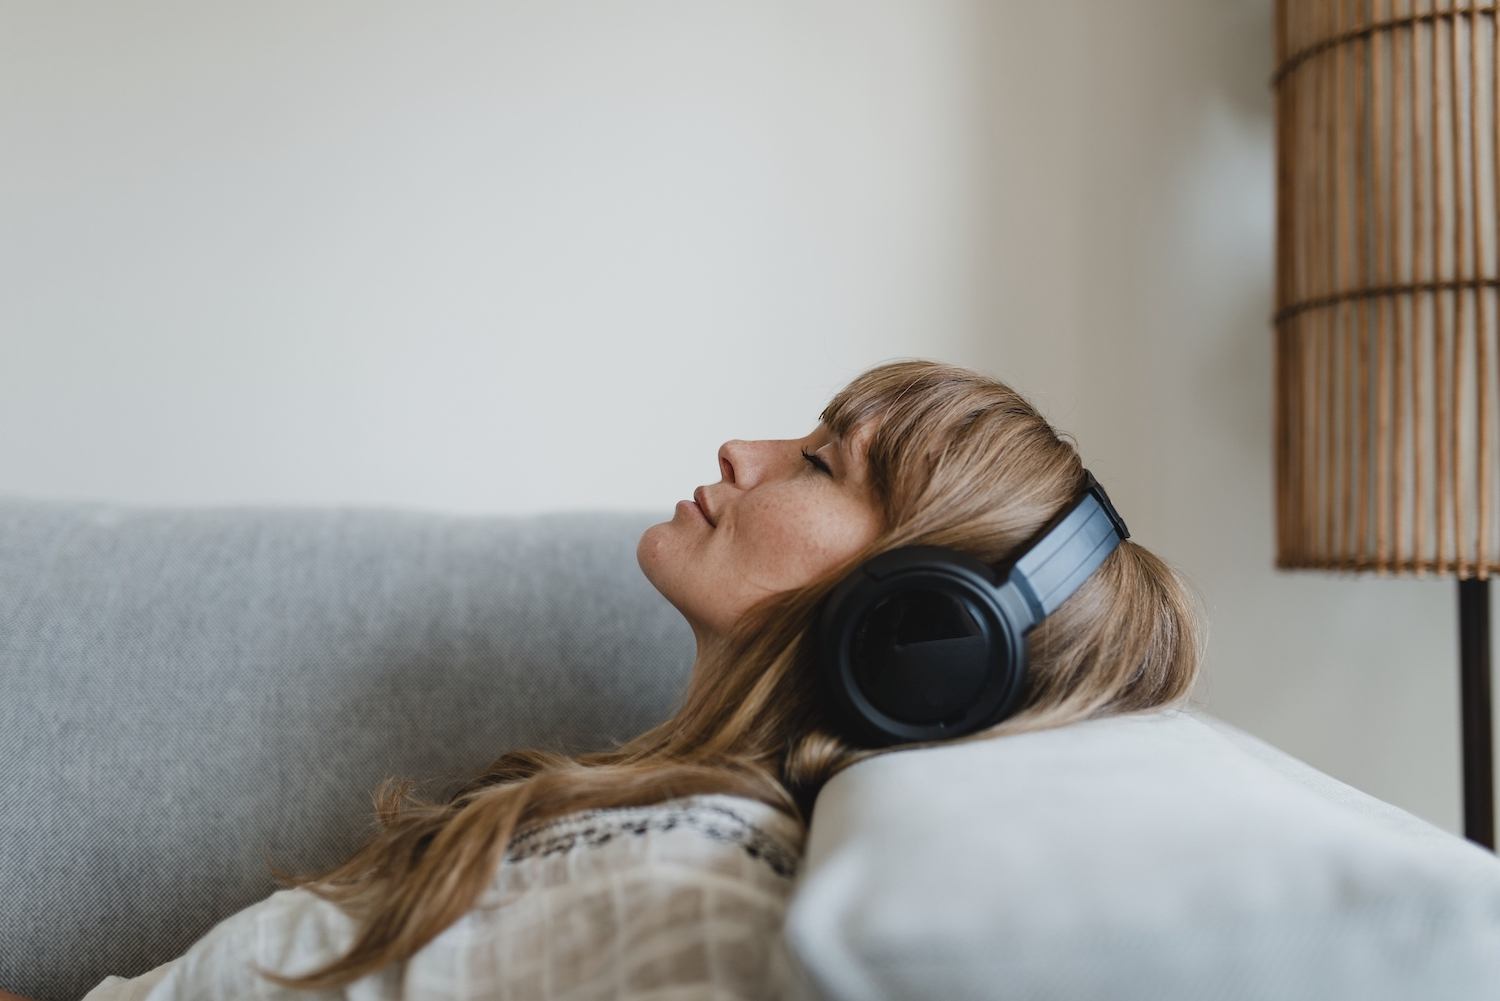 Music Relaxation for Stress: Listen Your Way to Calm